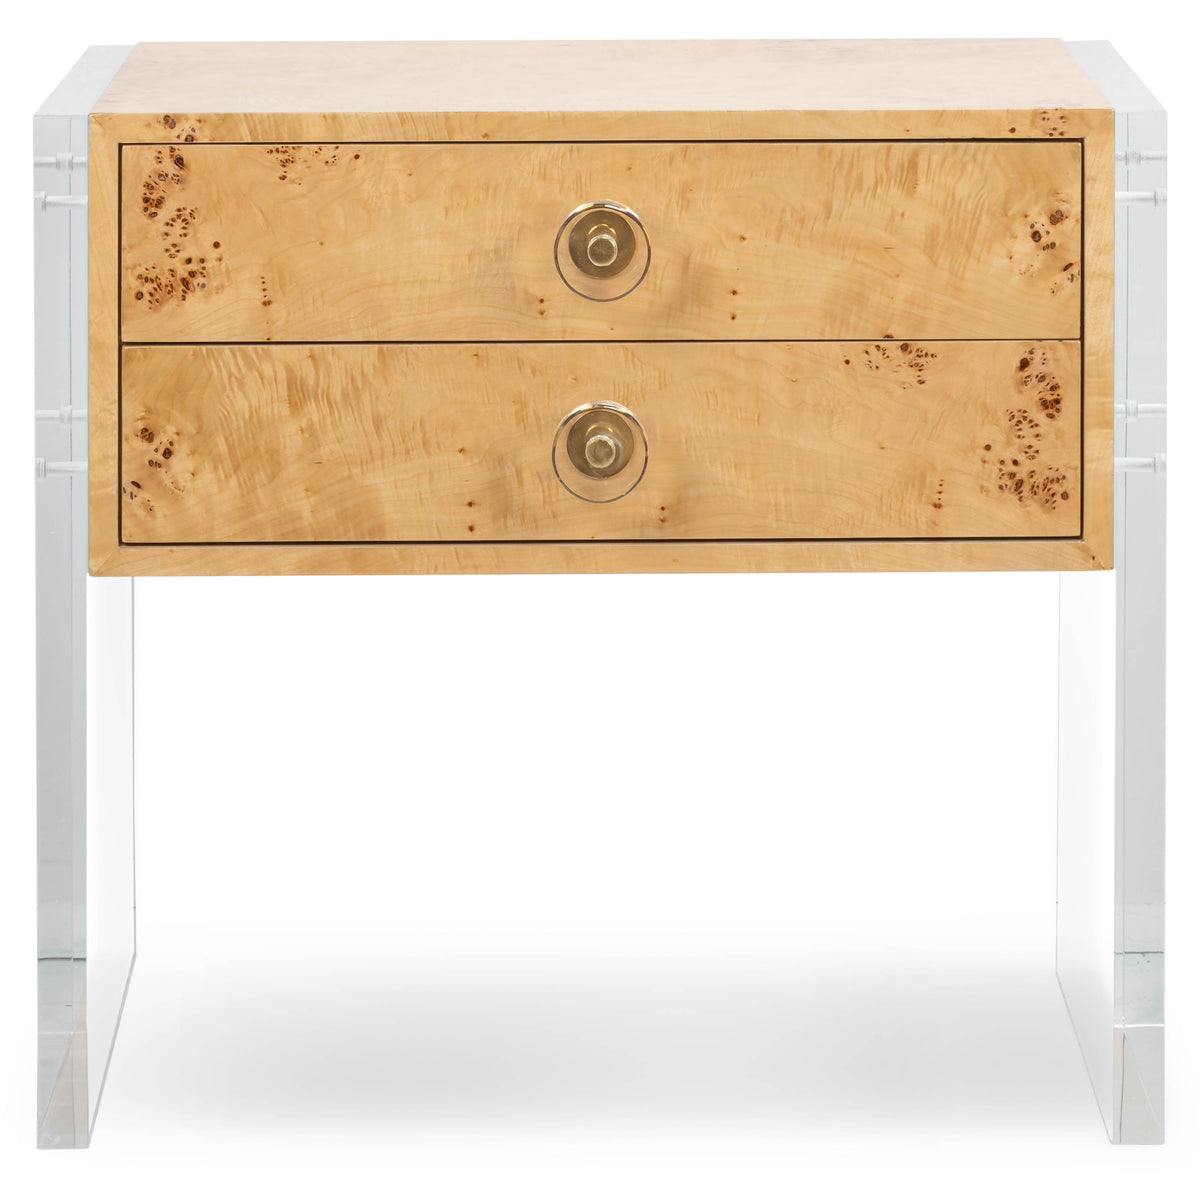 Goldfinger 2 Drawer Side Table in Burled Wood and Lucite Plinth Legs